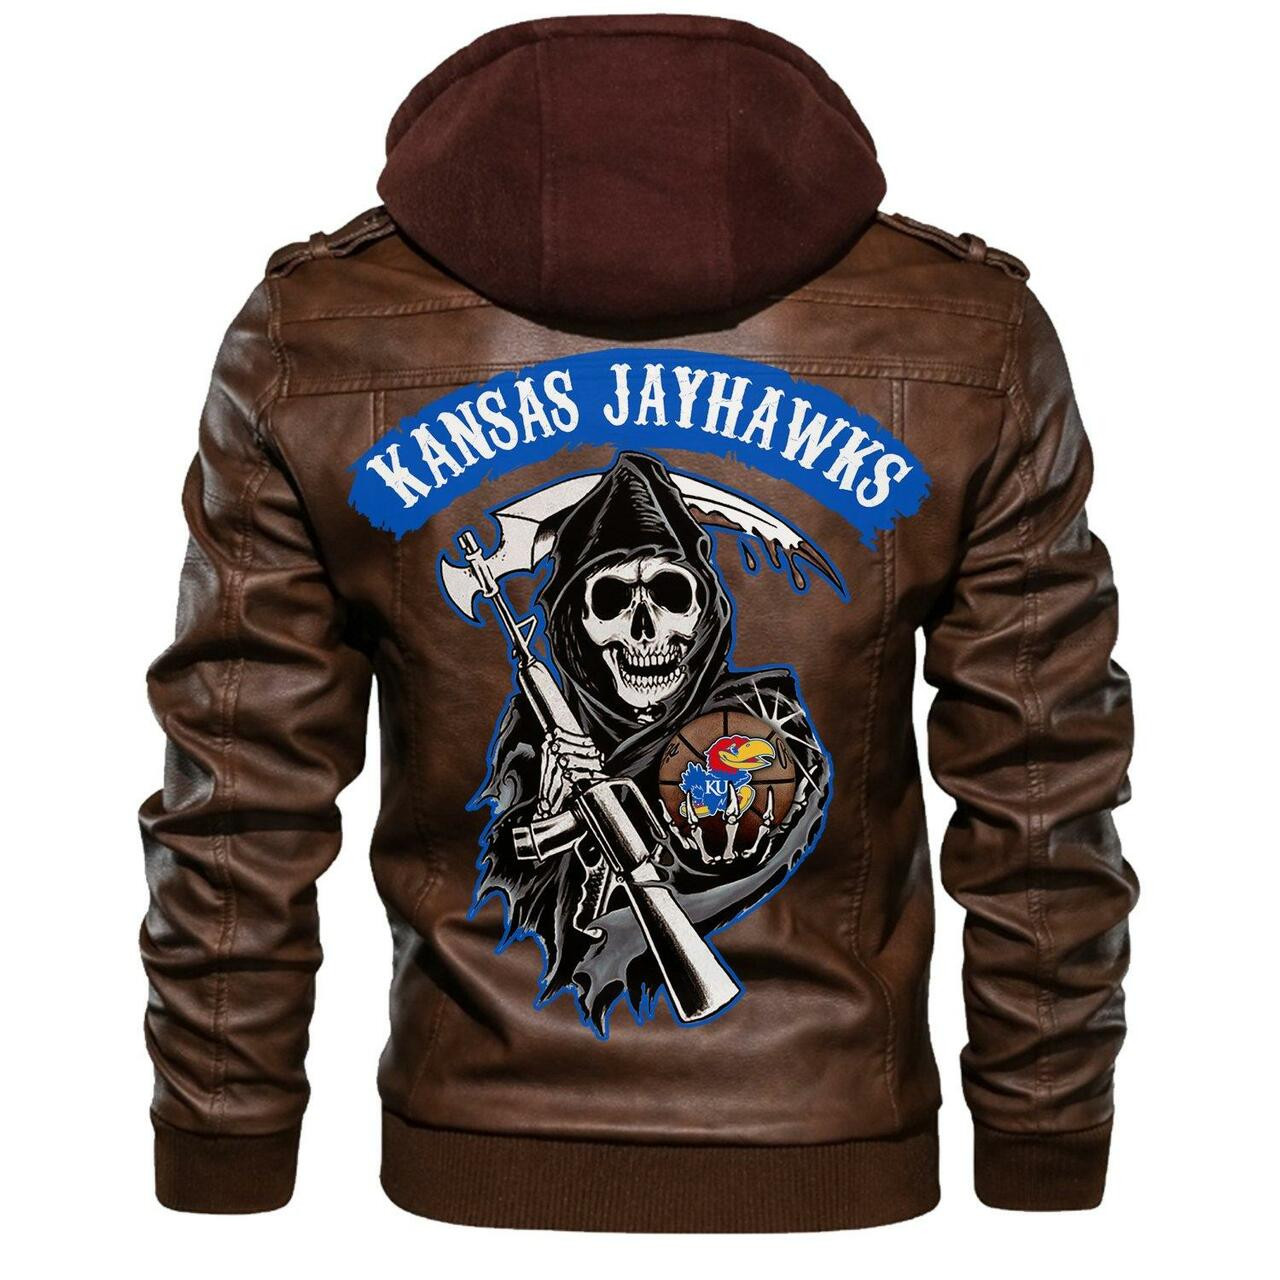 Check out and find the right leather jacket below 103